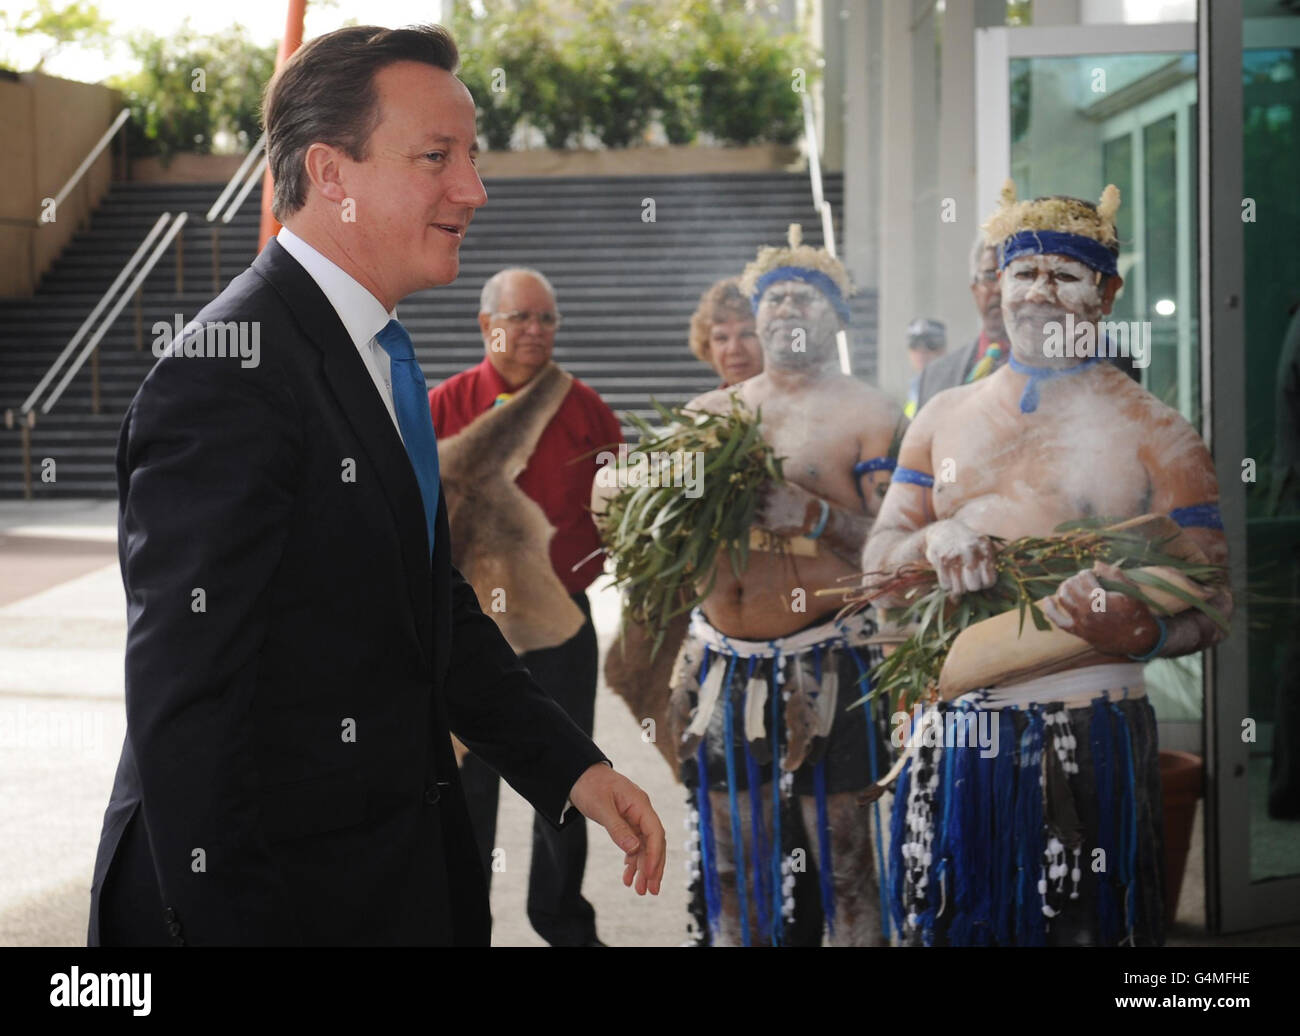 Prime Minister David Cameron arrives at the Commonwealth Heads of Government Meeting in Perth, Australia, for the biennial summit which brings together political leaders from across the 54-country group. Stock Photo